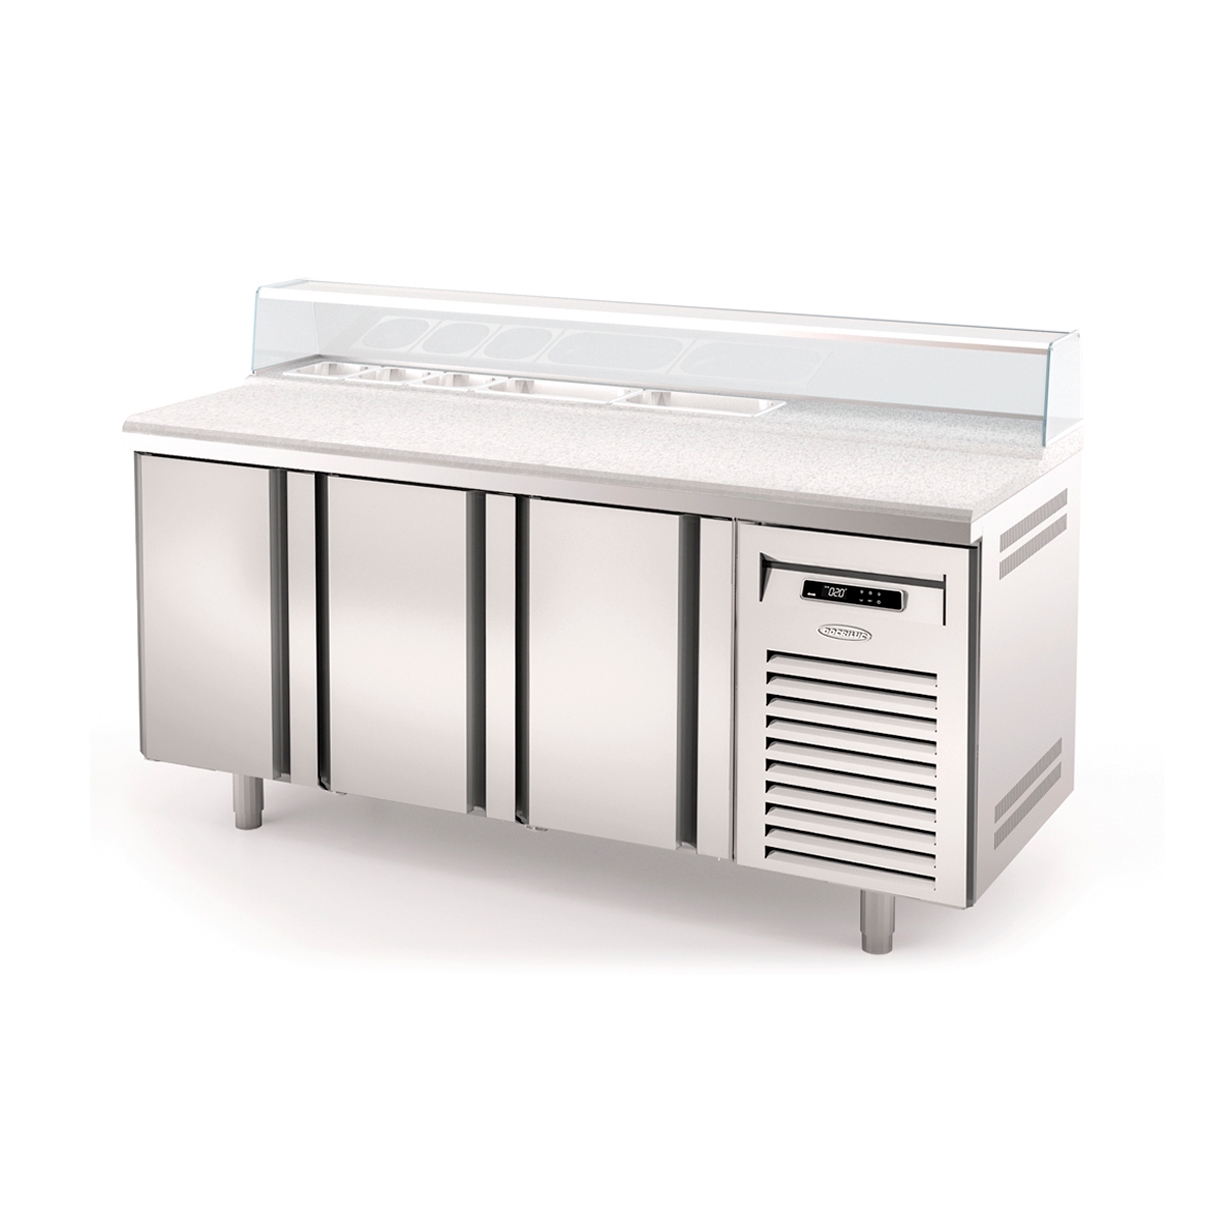 Grastronorm 1/1 Refrigerated Table for Food Preparation DMFG70